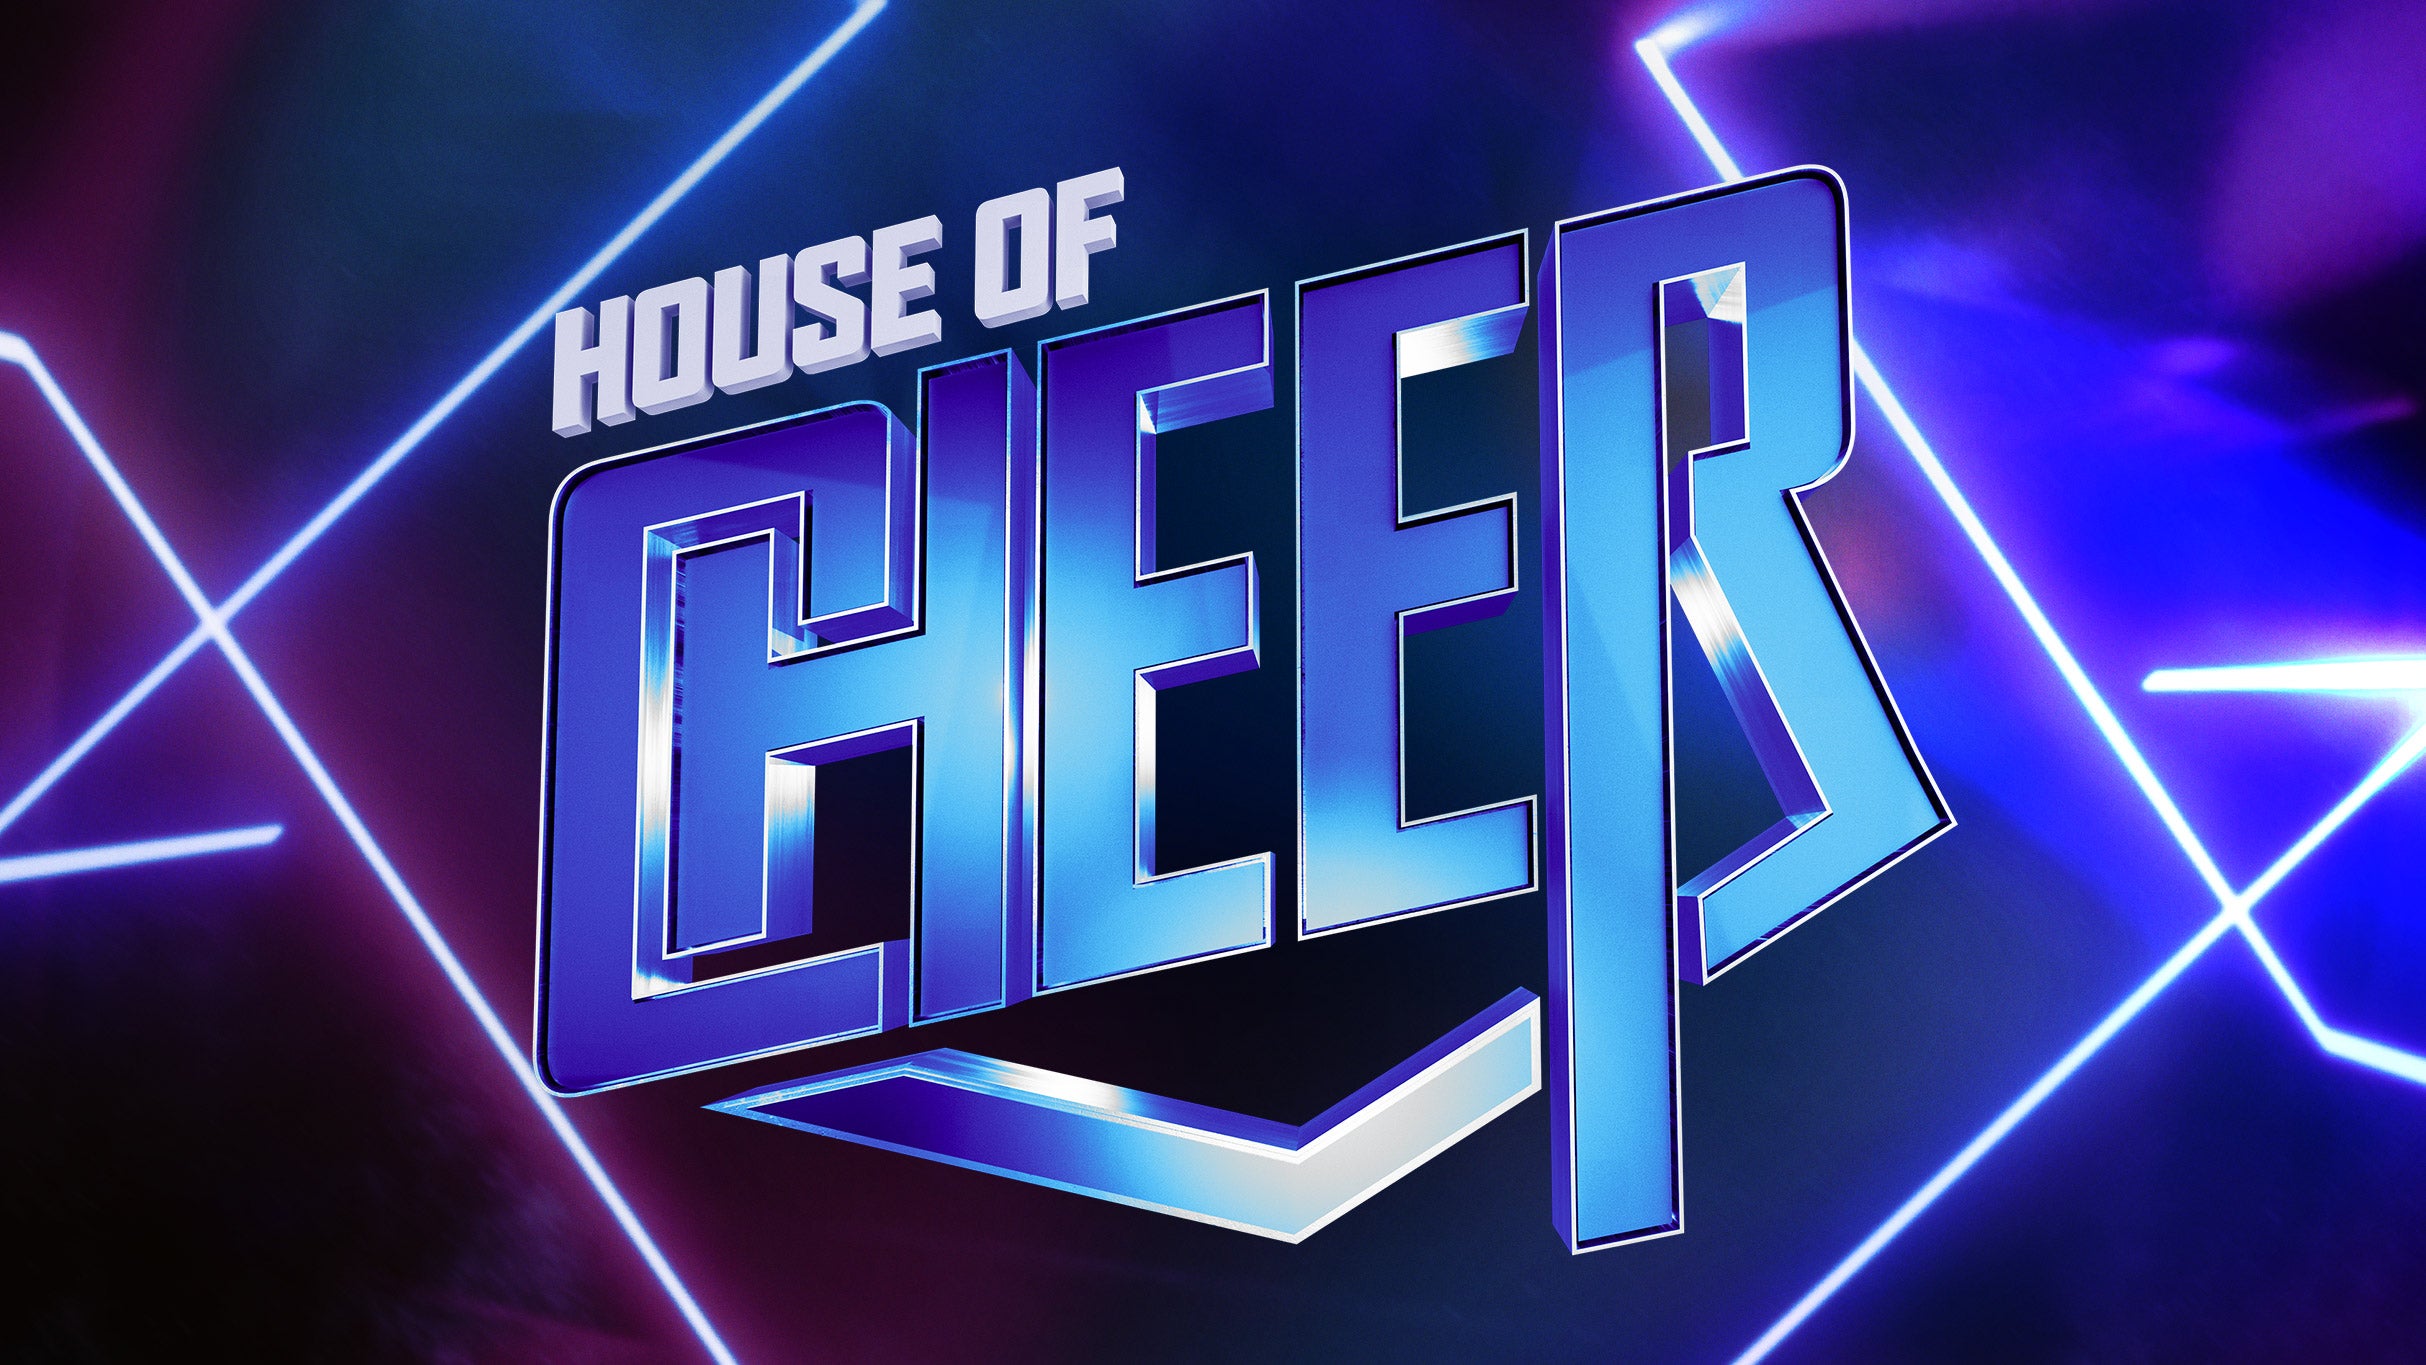 updated presale passcode for House of Cheer: The Level Up Tour 2023 presale tickets in Boston